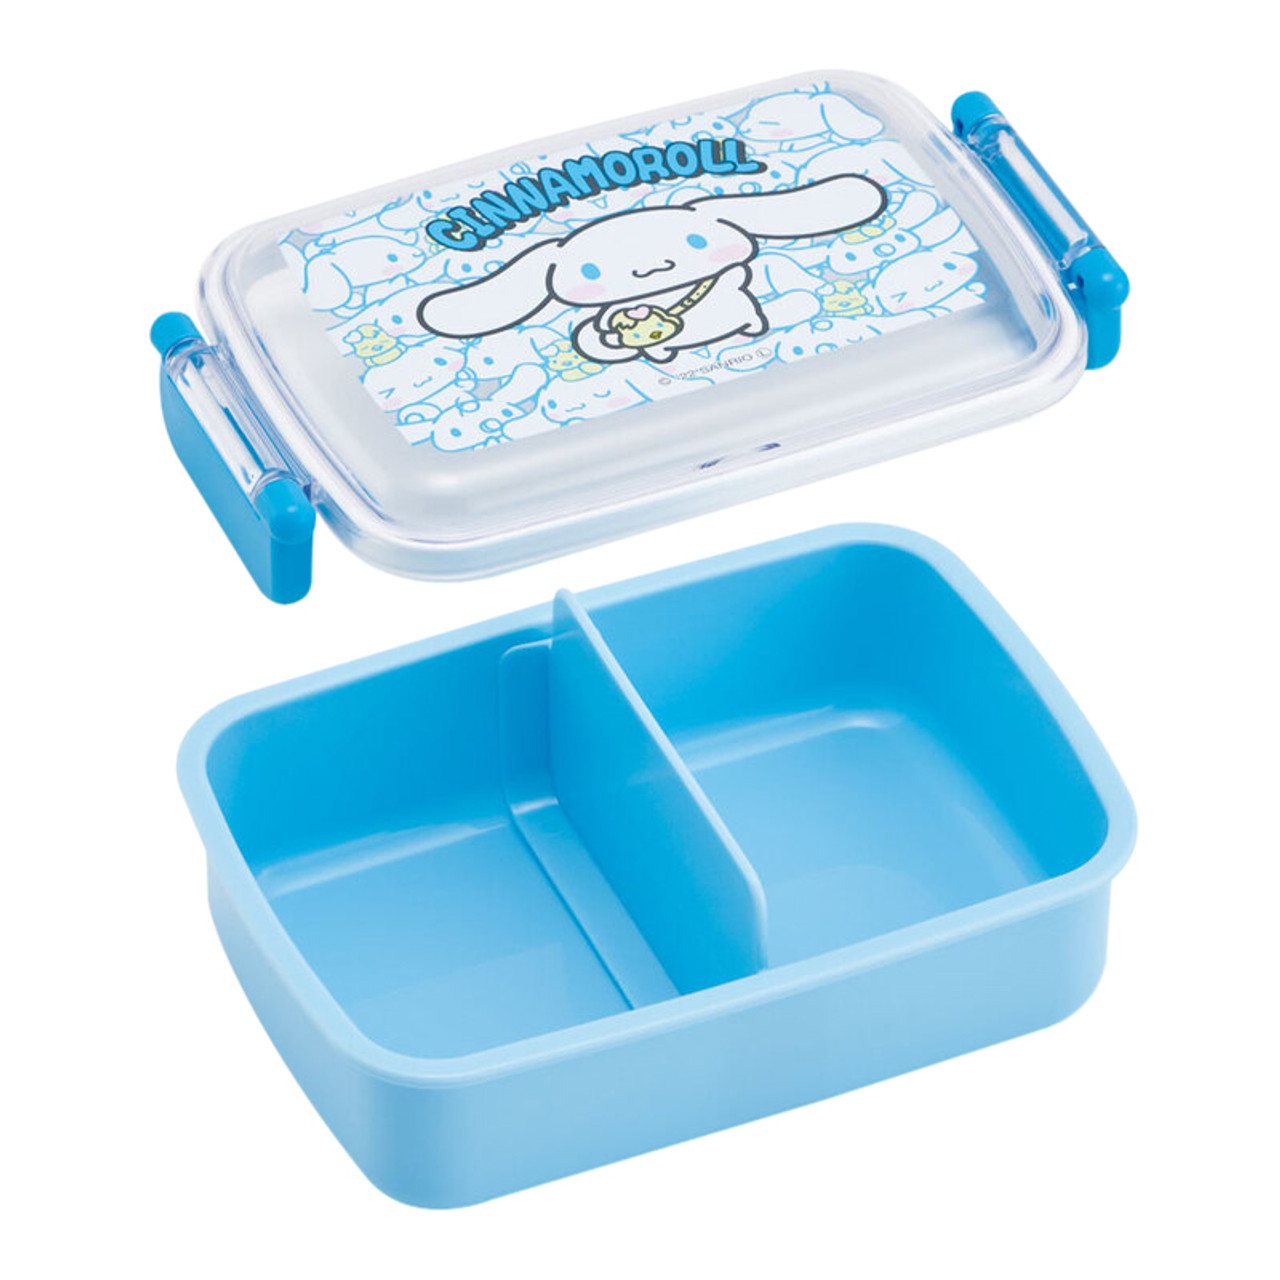  Cinnamoroll Bento Box, 2-Tier, Antibacterial, Bento Box,  Large Capacity, Fluffy, Bento Box, Includes Spoon, For Women, Men, Kids,  Thermal Lunch Box : Home & Kitchen